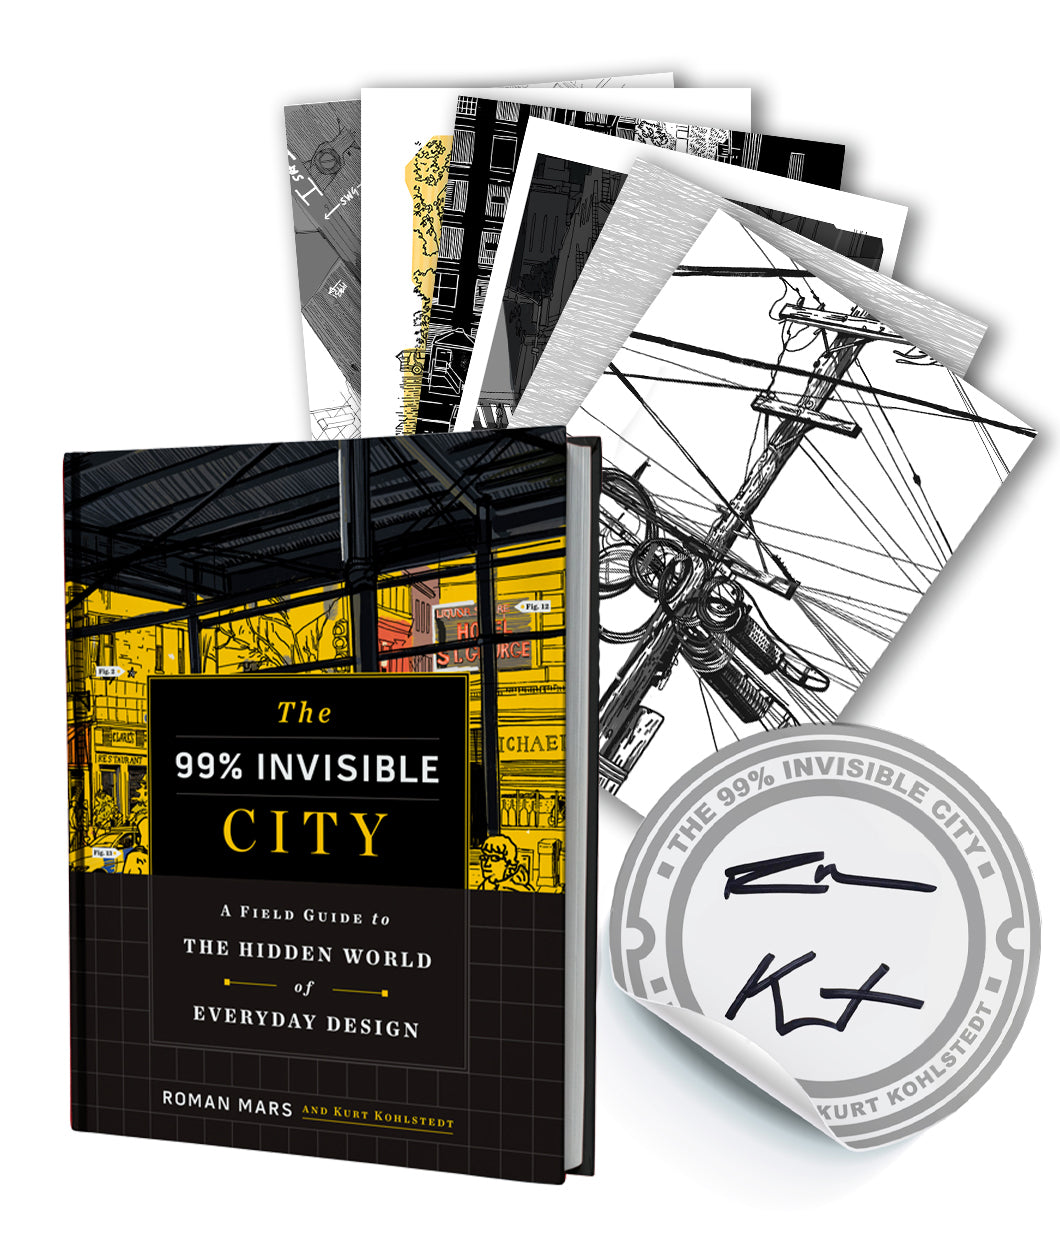 A yellow and black hardcover book, a signed white and gray circular book plate sticker, and stack of 7 postcards by 99% Invisible